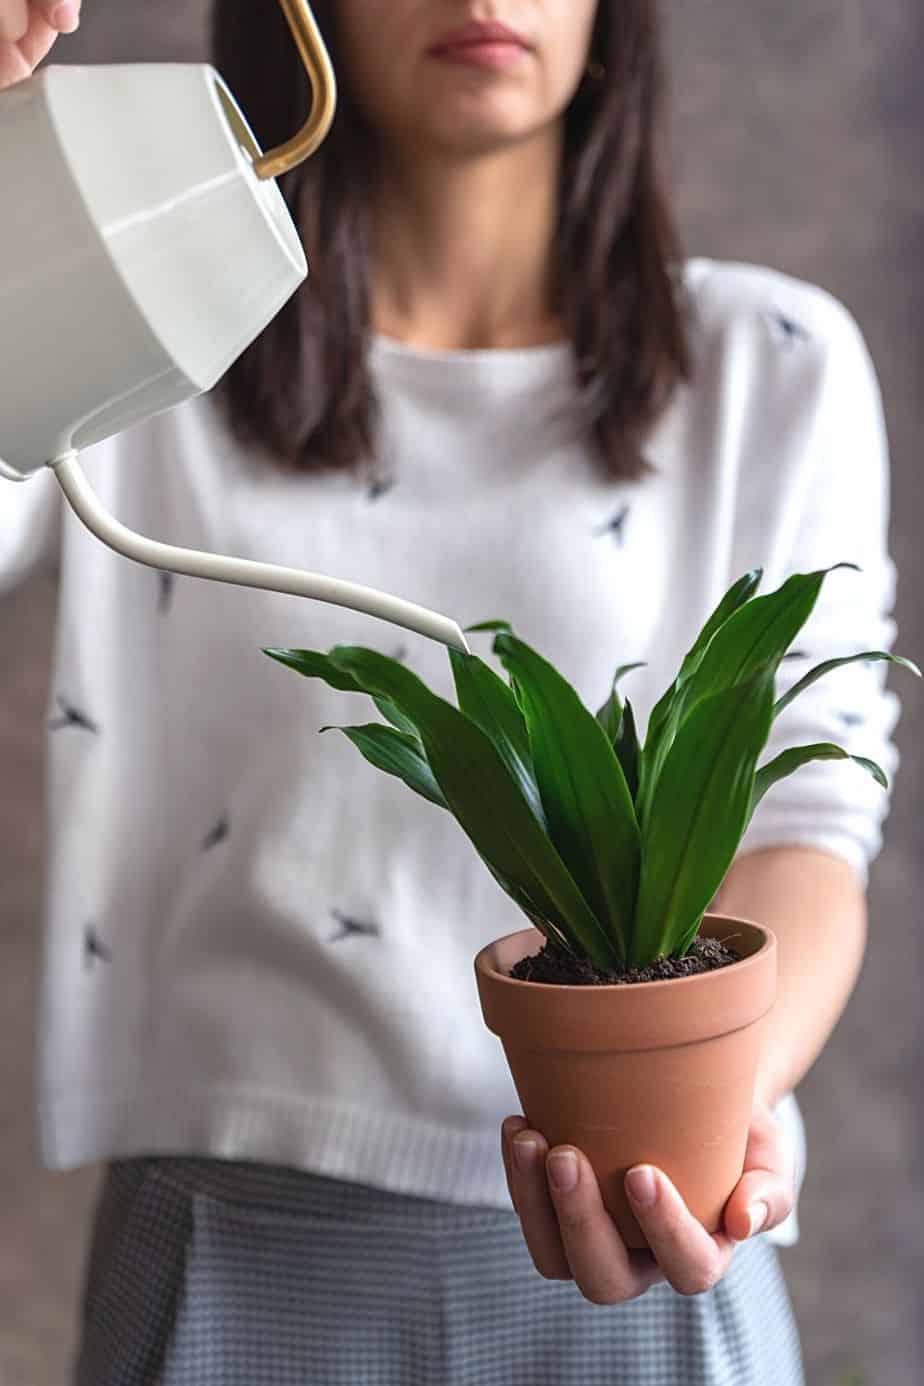 Dracaena grows well in water, making sure to use flouride- and chlorine-free water